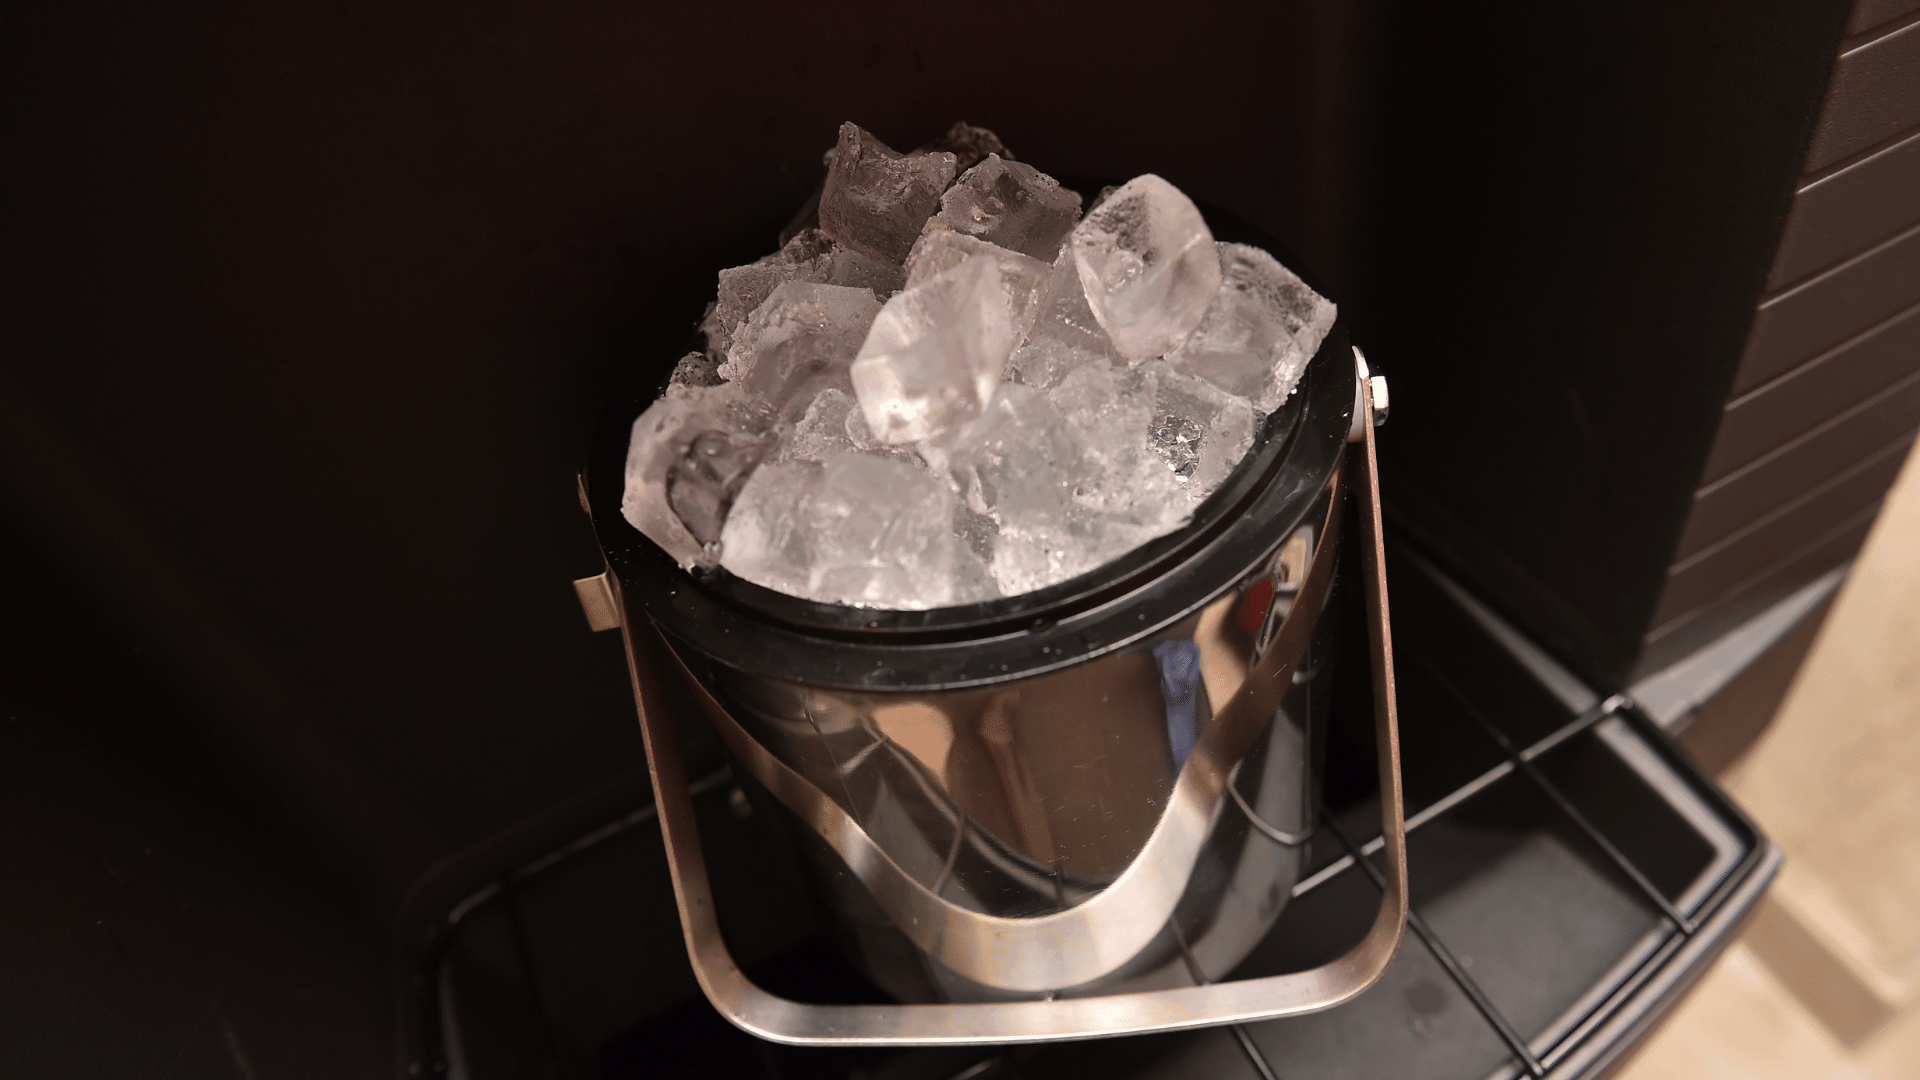 5 Best Nugget Ice Makers 2022: Reviews & Top Picks 8